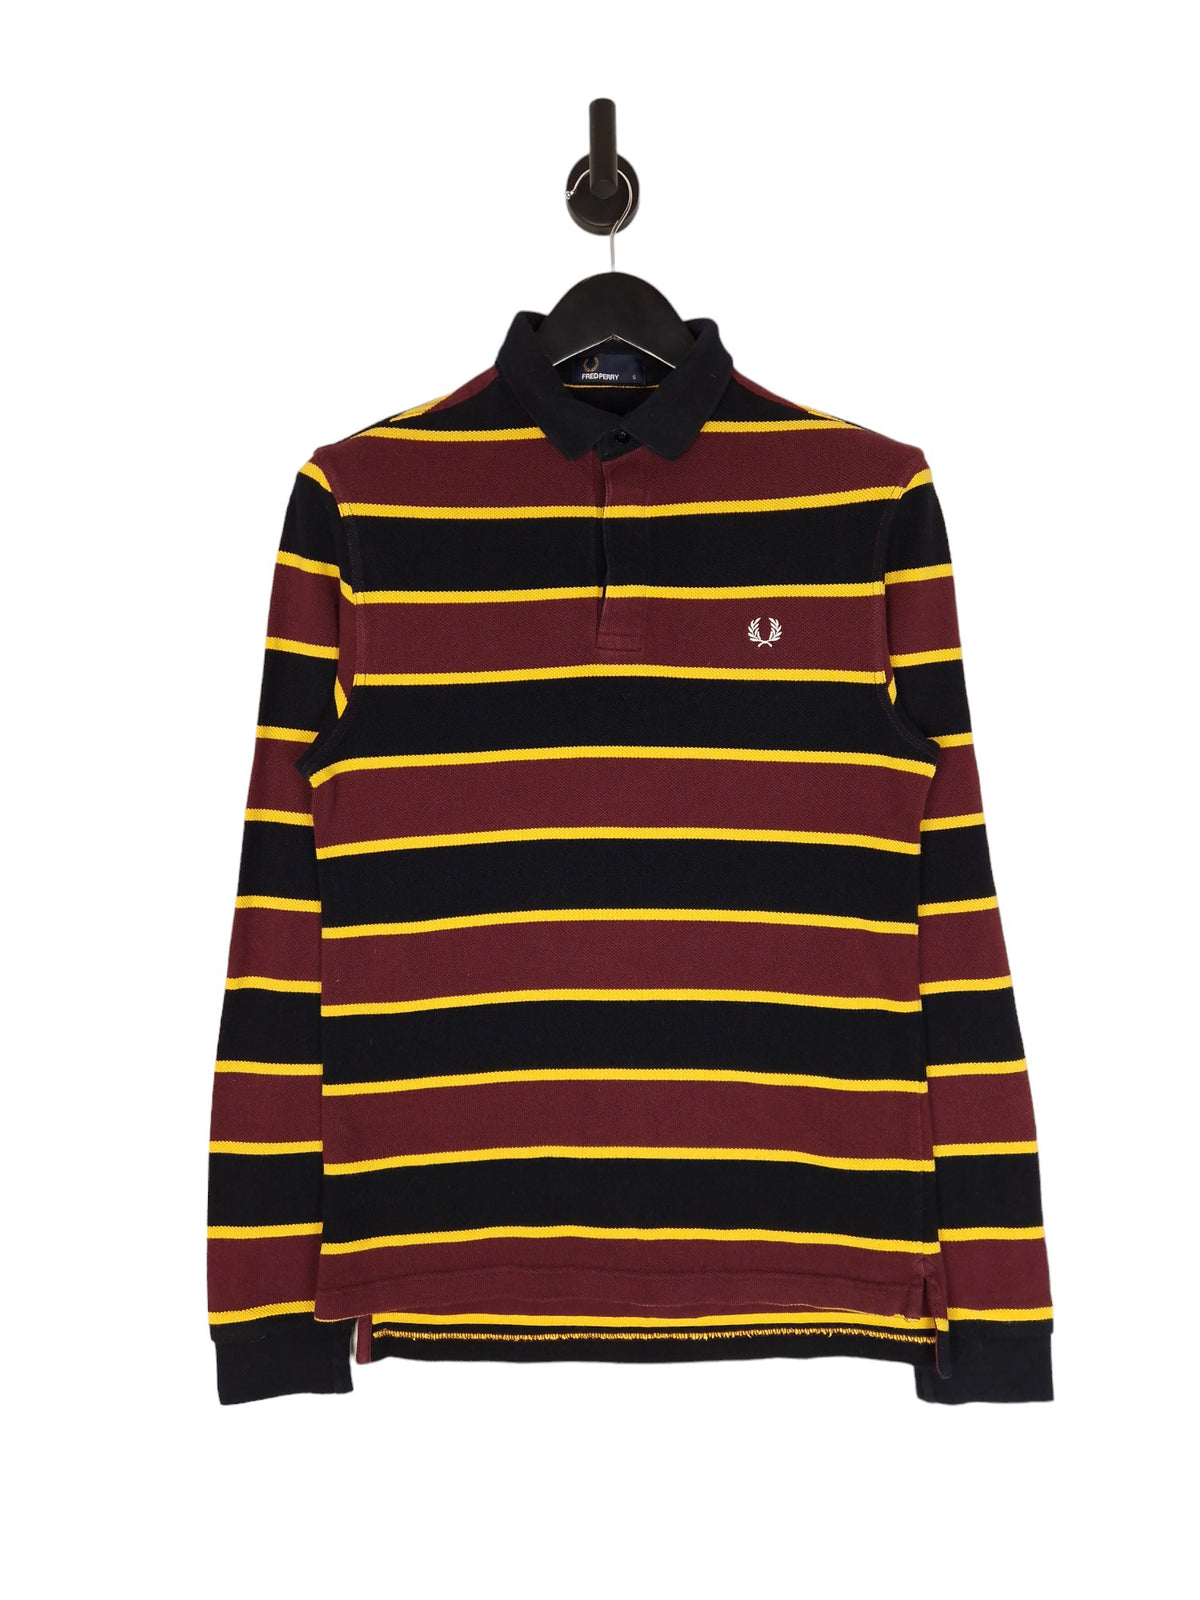 Fred Perry Long Sleeve Polo Shirt - Size Small